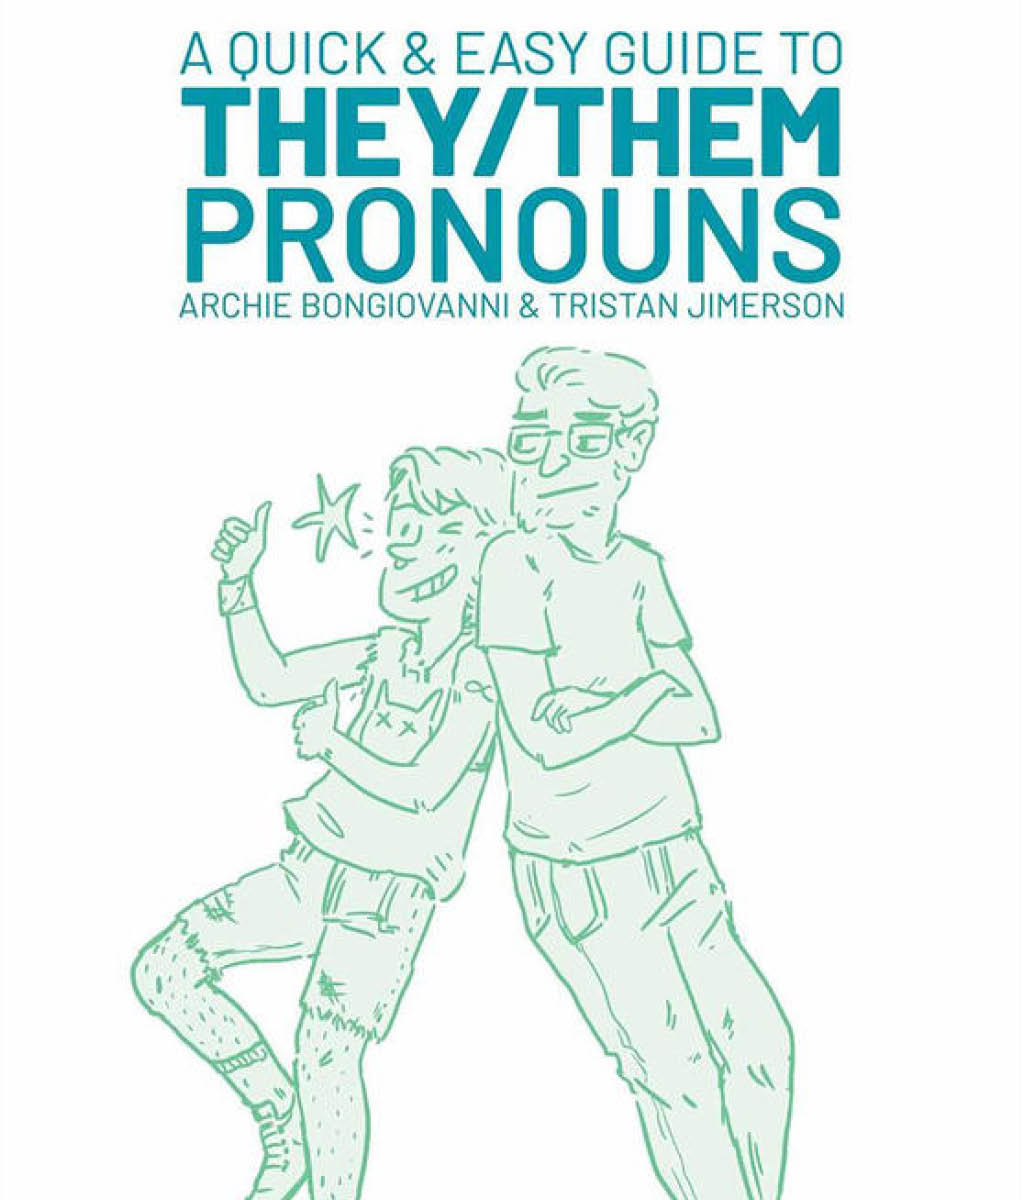 Quick &amp; Easy Guide to They/Them Pronouns by Archie Bongiovanni &amp; Tristan Jimerson